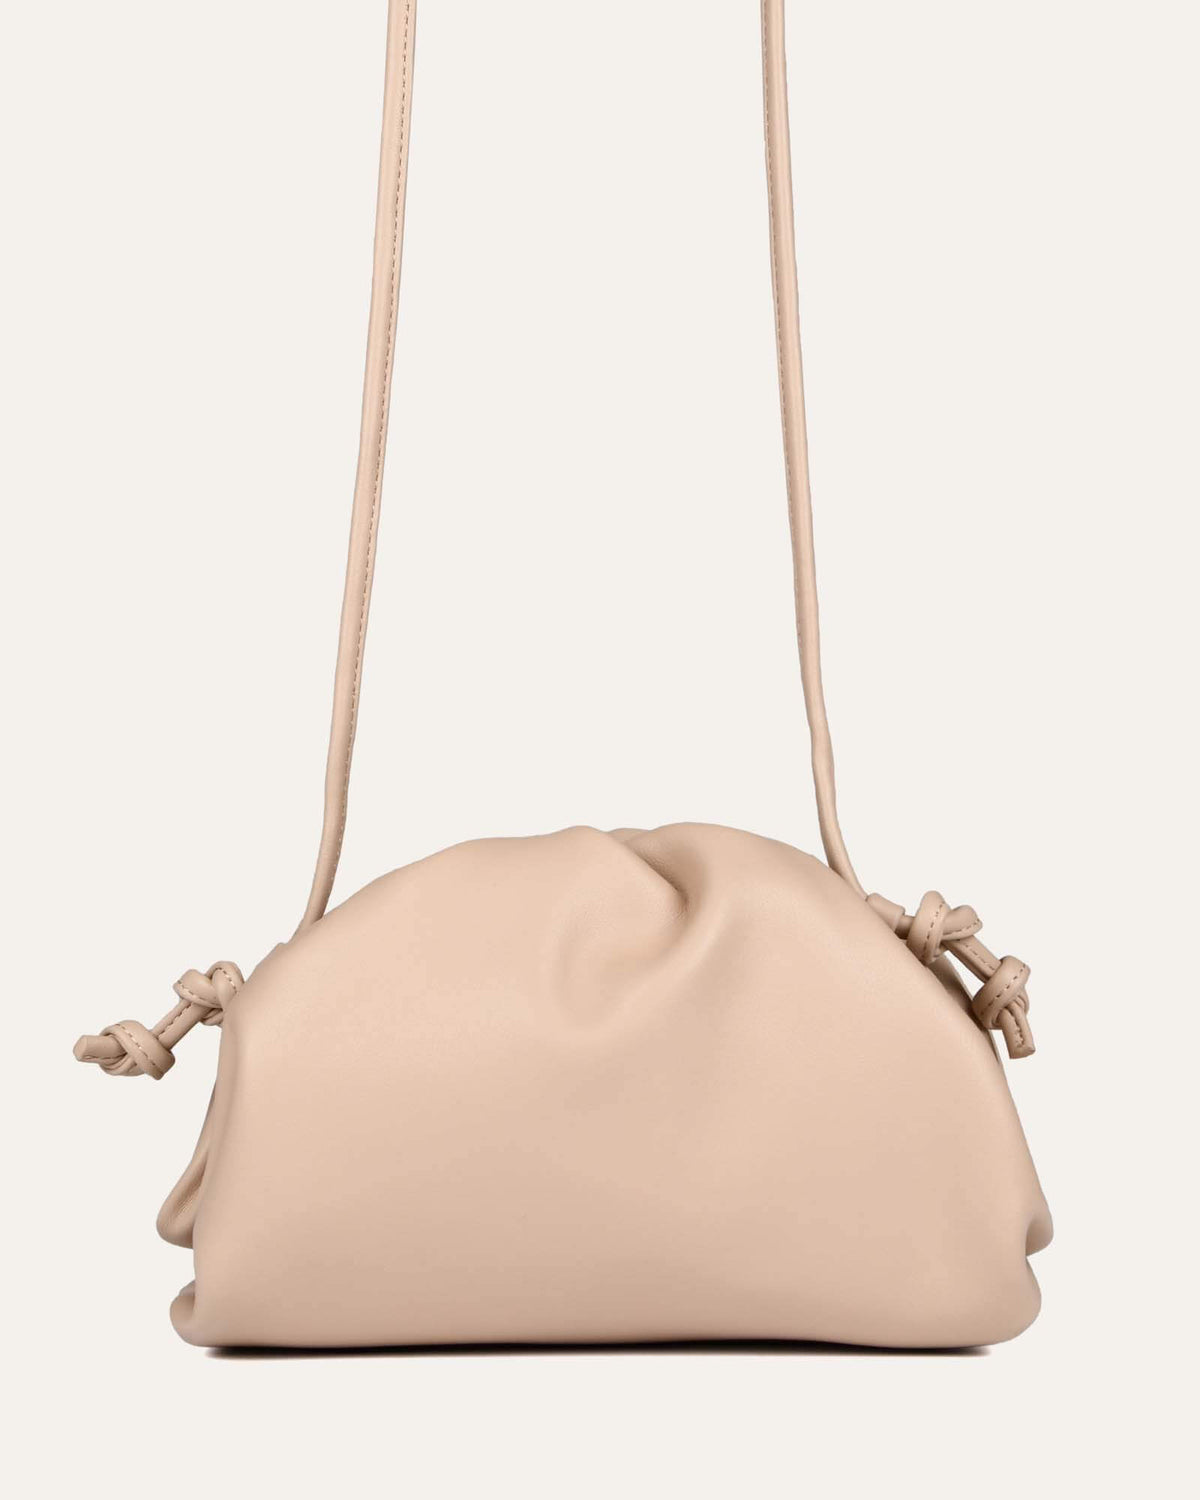 BAMBIE CROSS BODY BAG BEIGE LEATHER